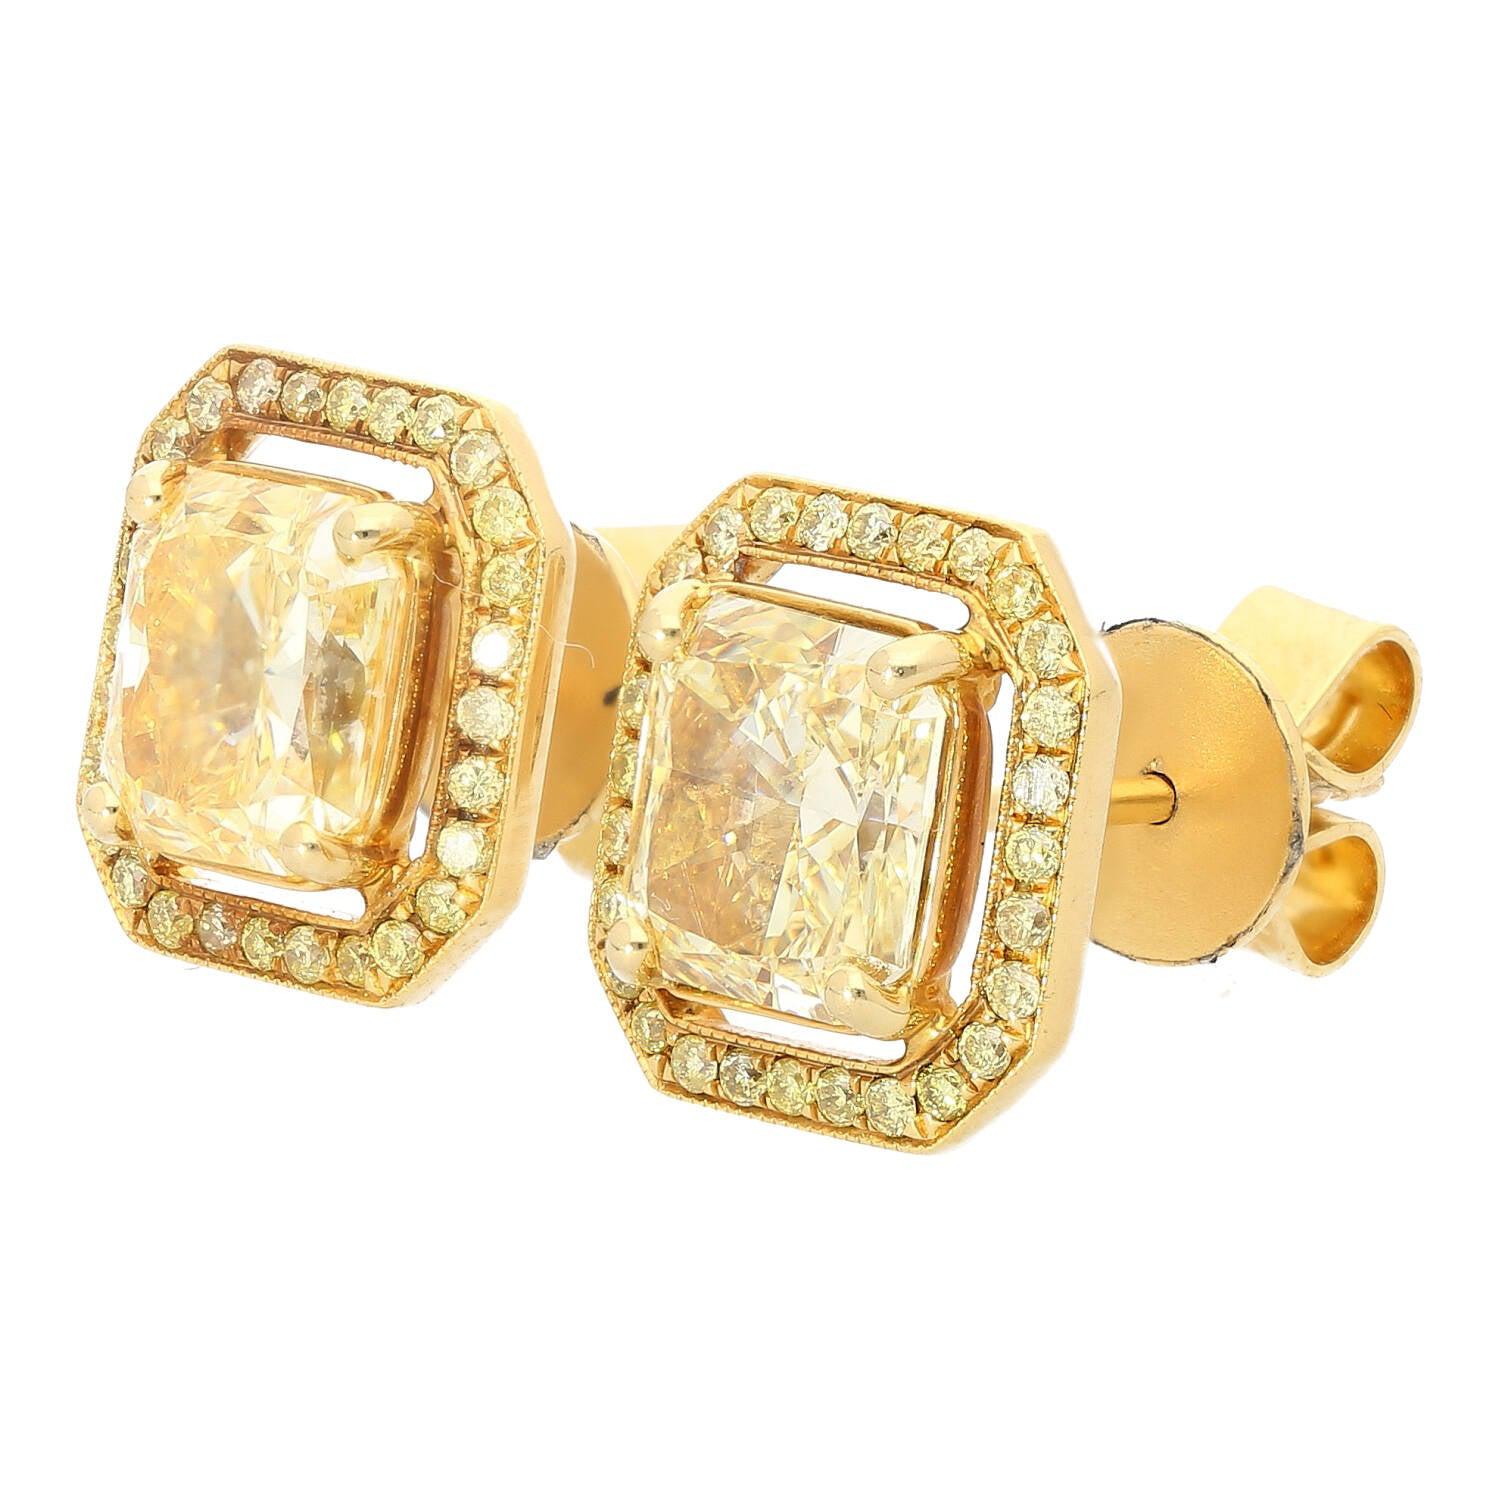 22 Karat Fancy Gold Tops with CZ - ErSi23335 - US$ 890 - 22k gold earrings,  beautifully studded with cubic zircon stones (Star Signity stones)in flower  shape